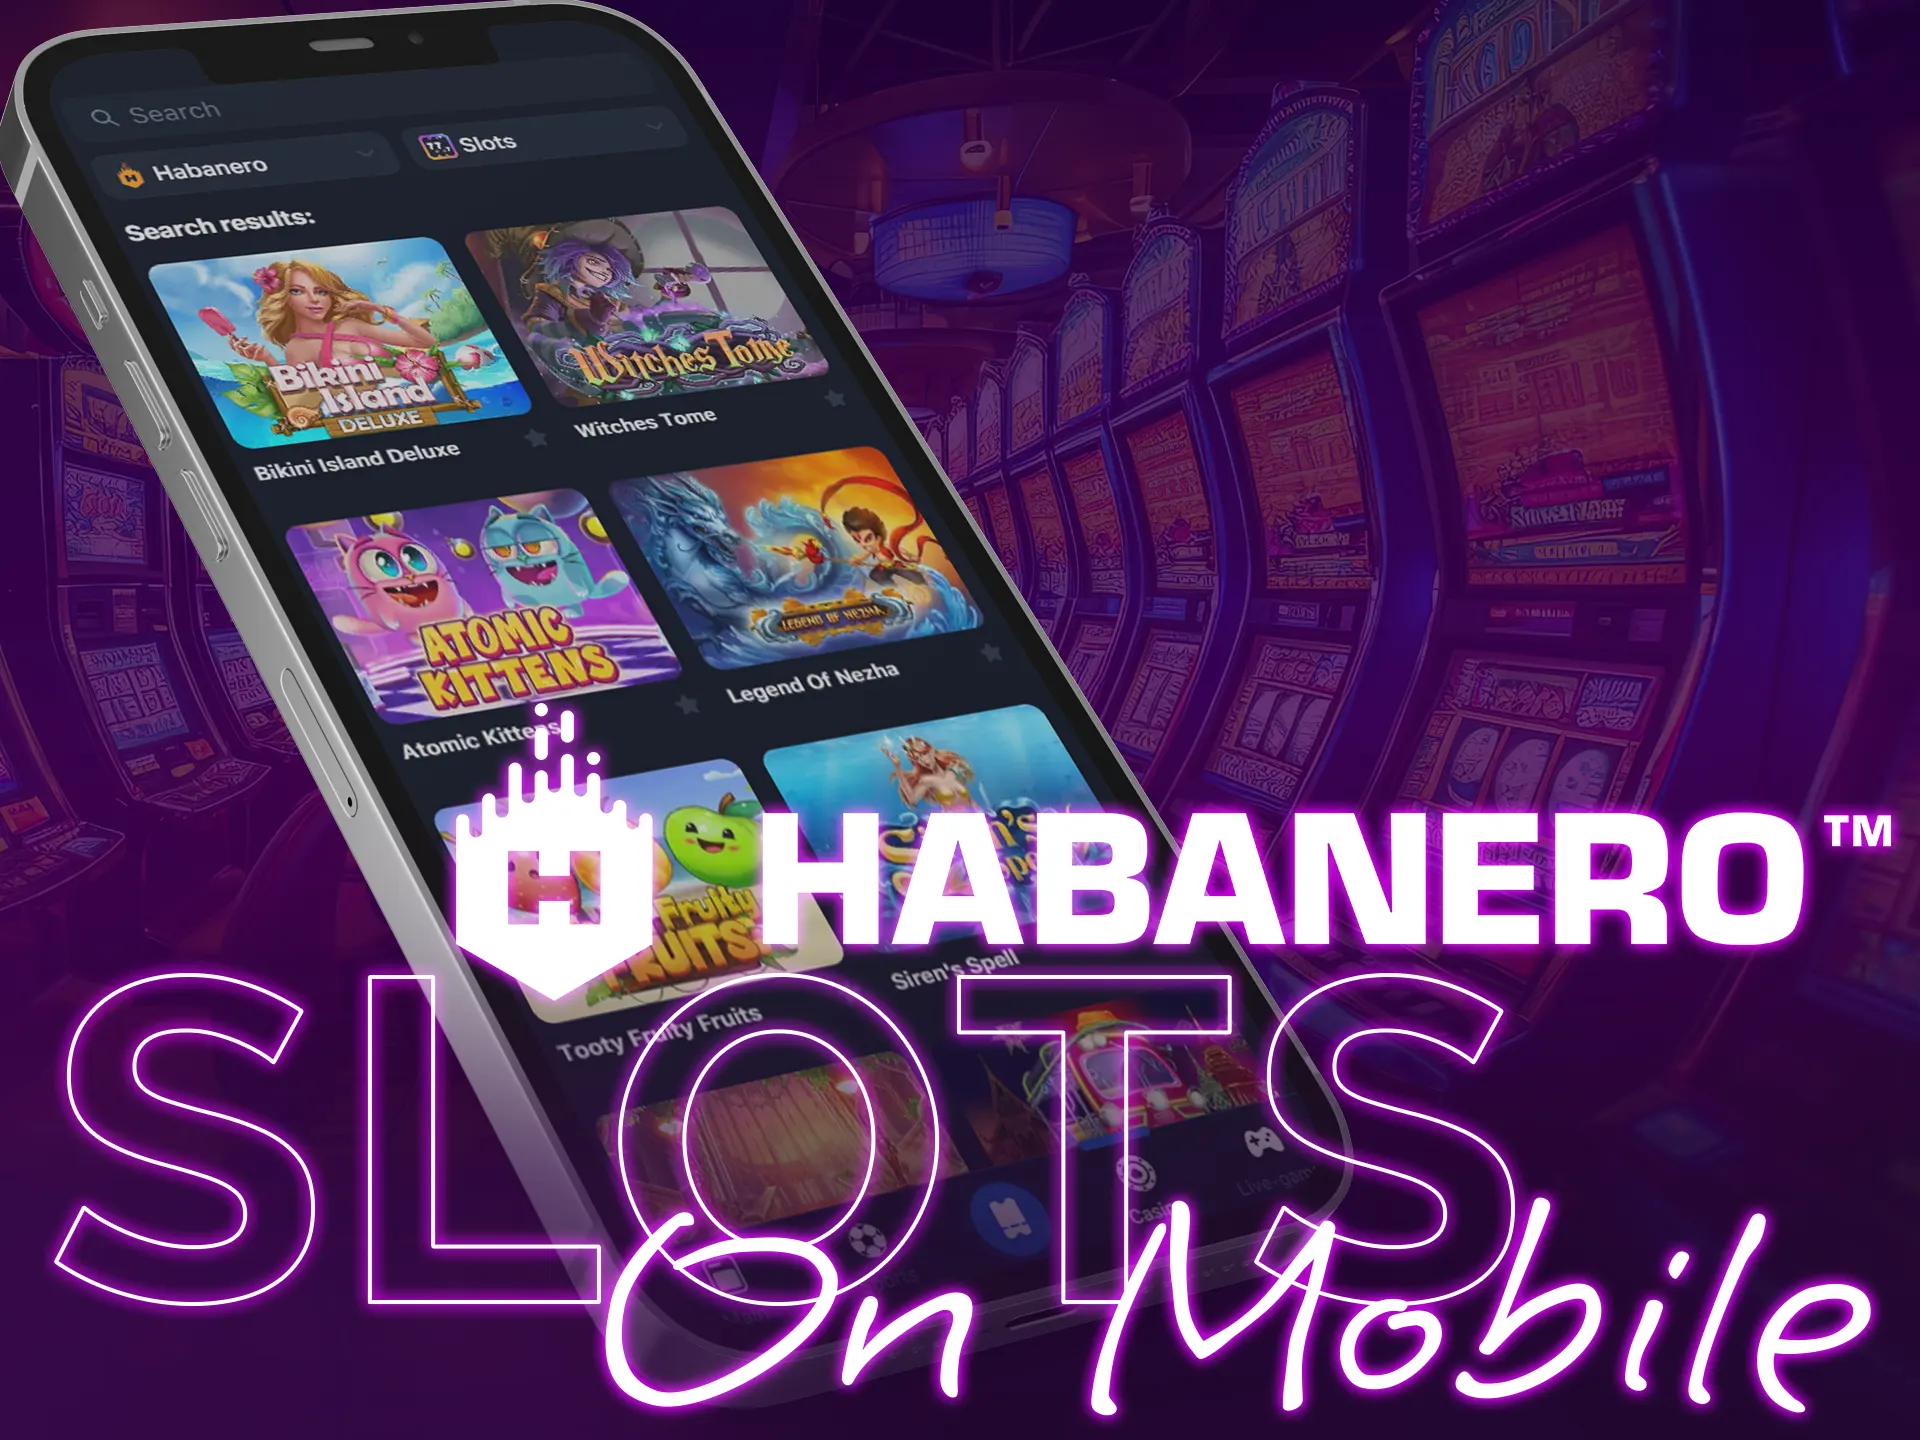 Habanero games optimized for all screens, including many Android and iOS devices.